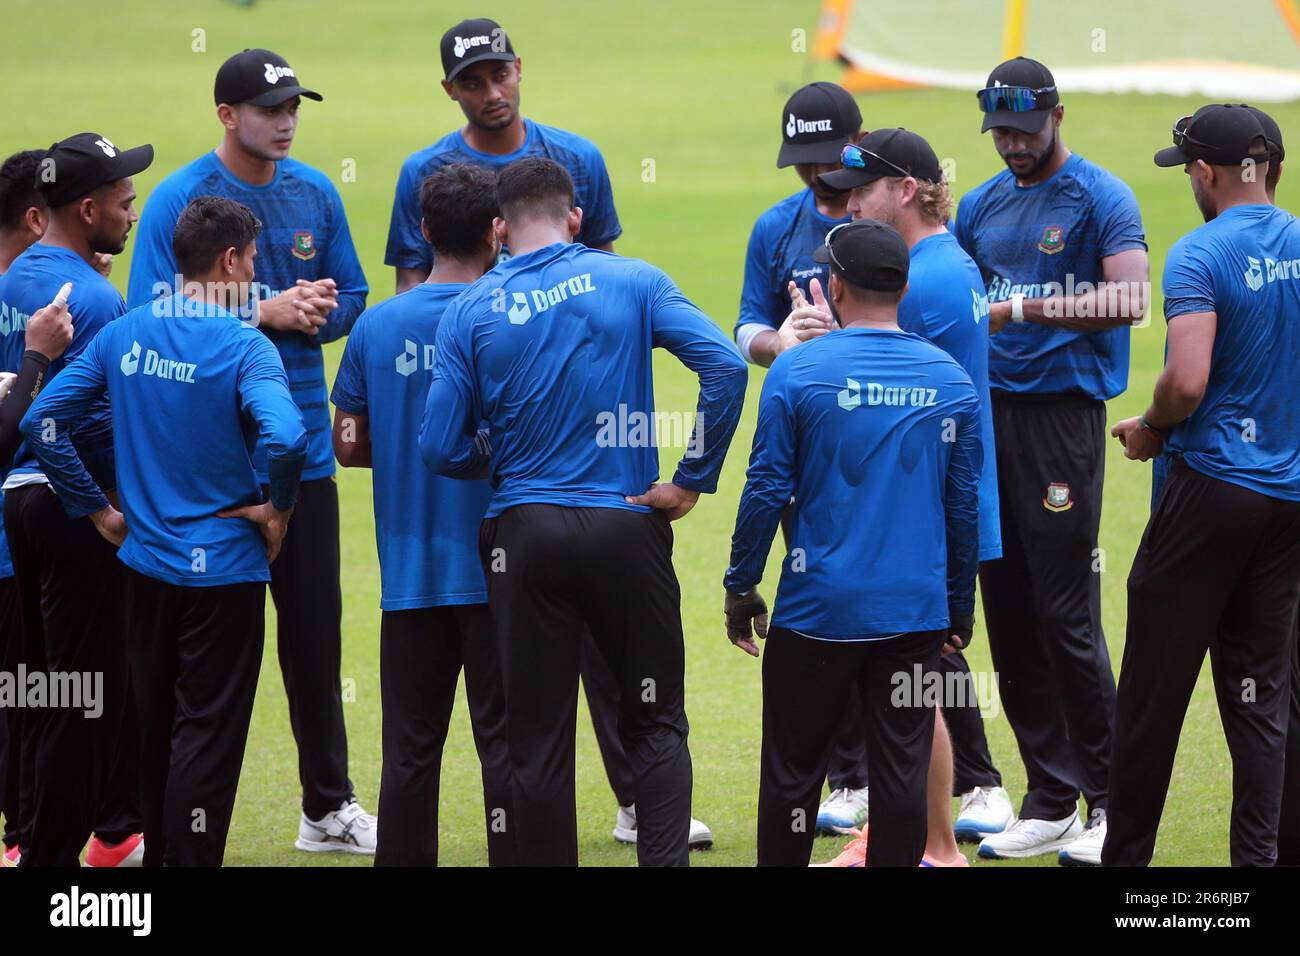 Bangladeshi cricketers attend practice session at the Sher-e-Bangla ...